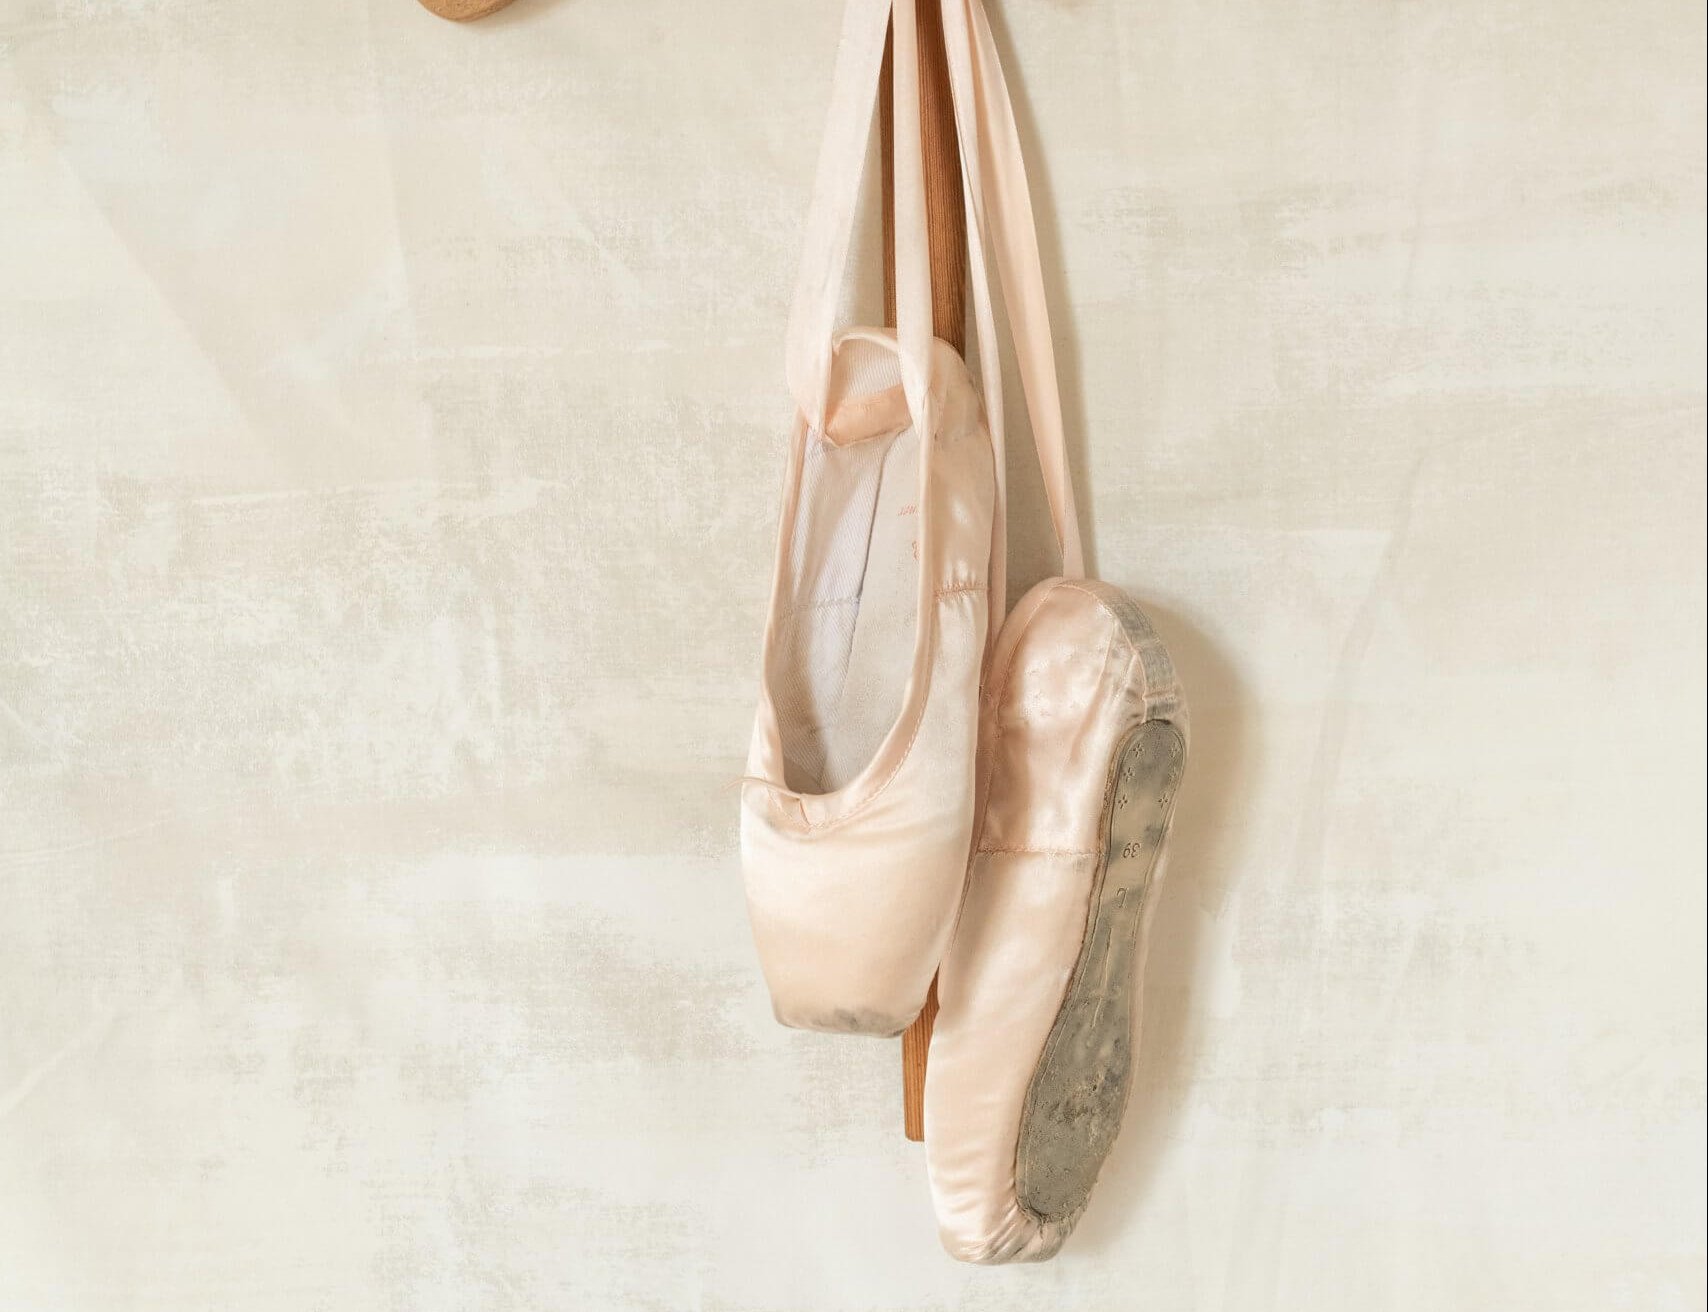 Eating disorders and the ballet industry: why change needs to occur ...